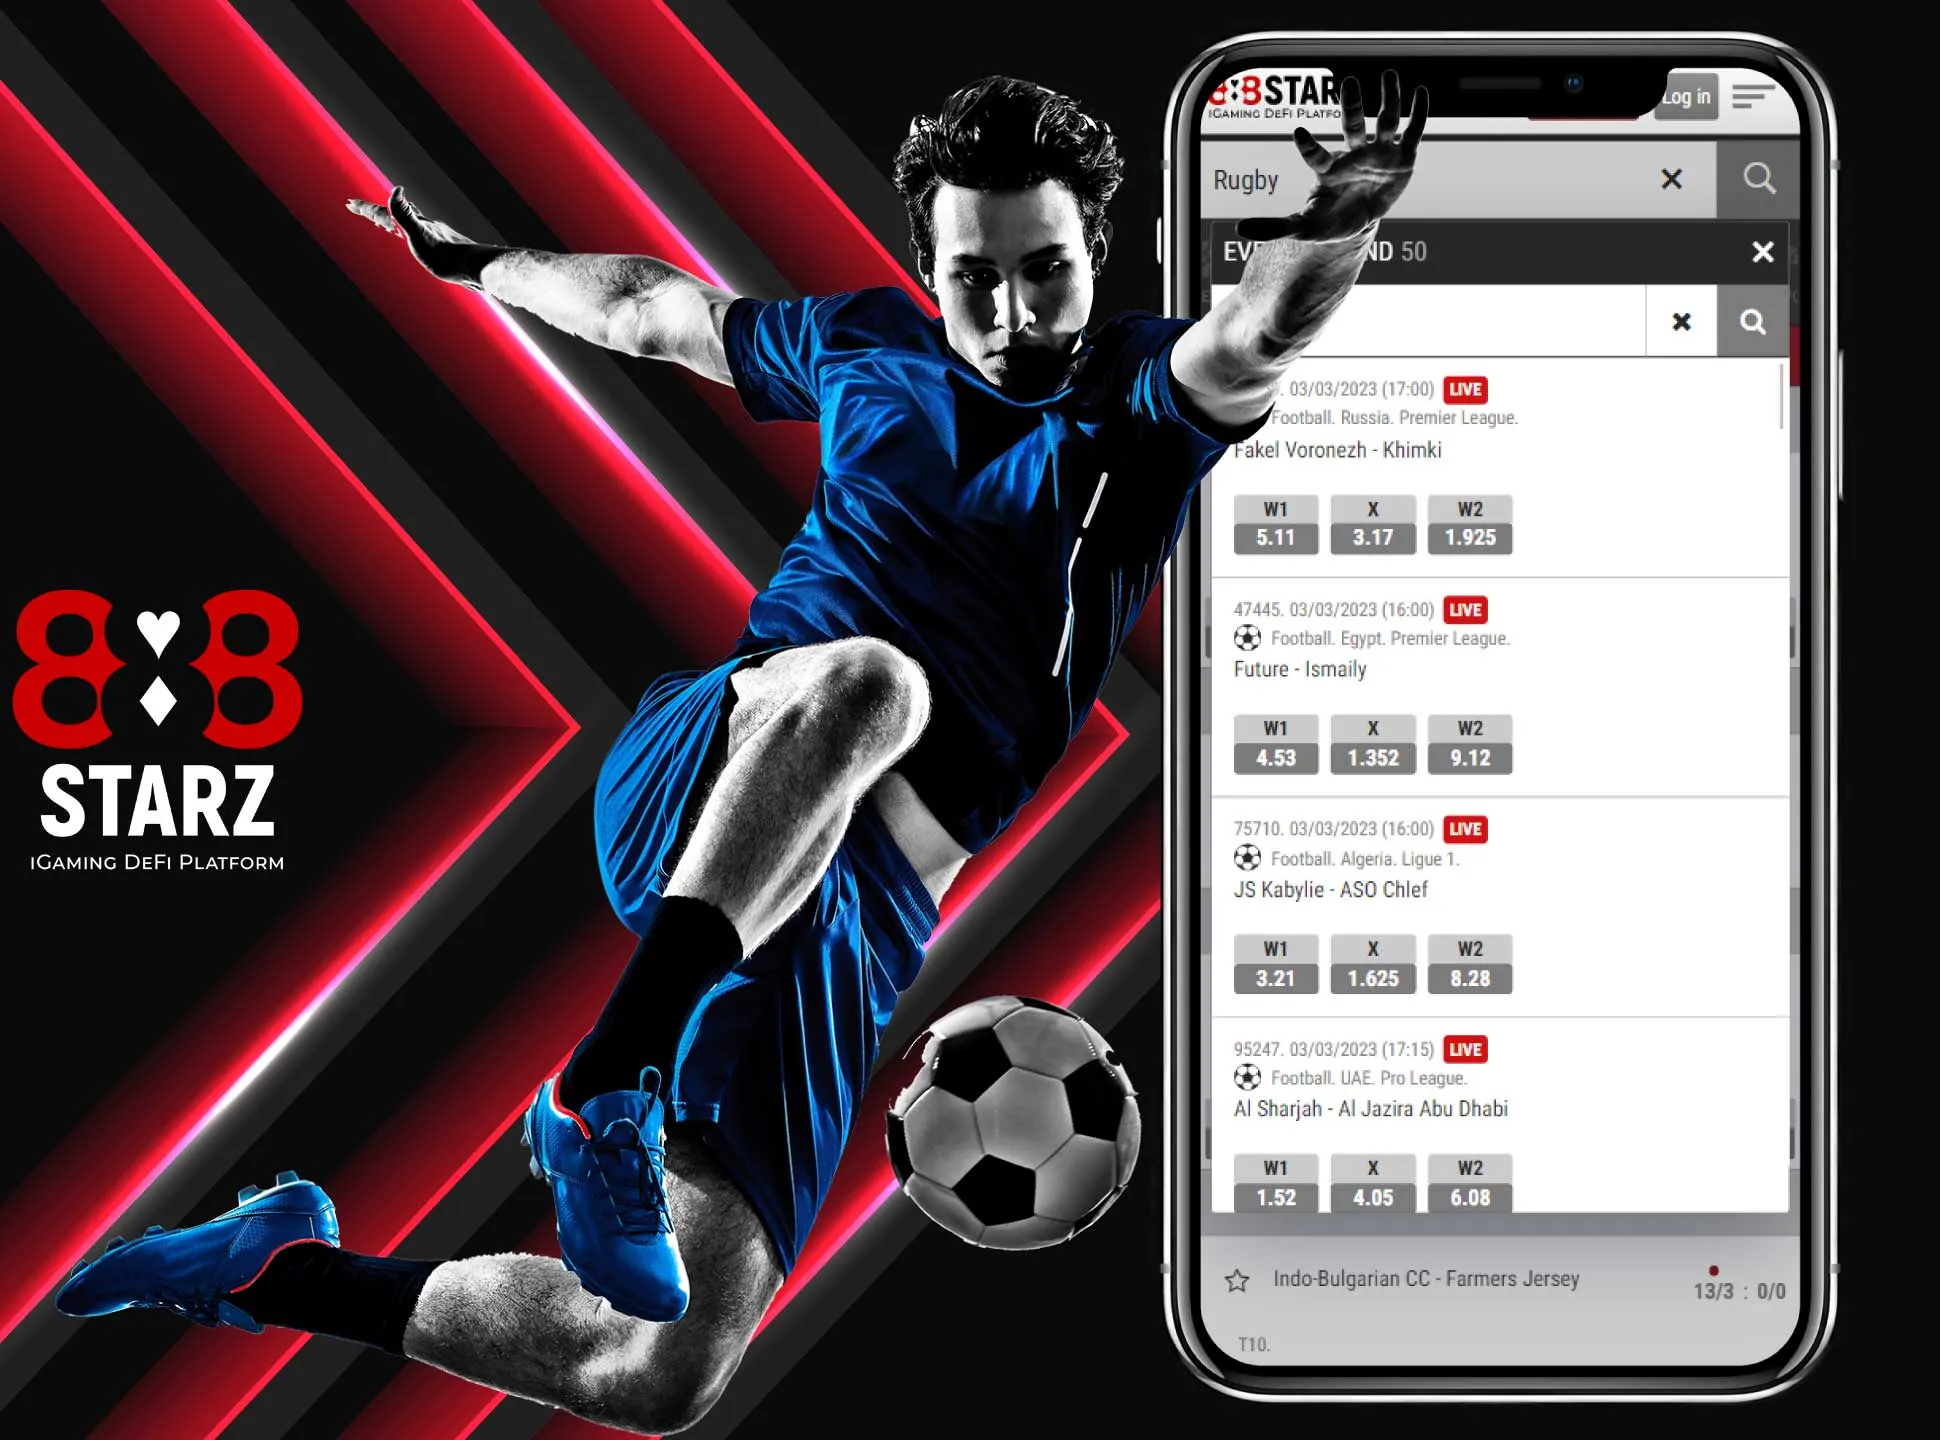 Choose your favorite football team to place a bet on it in the 888starz app.